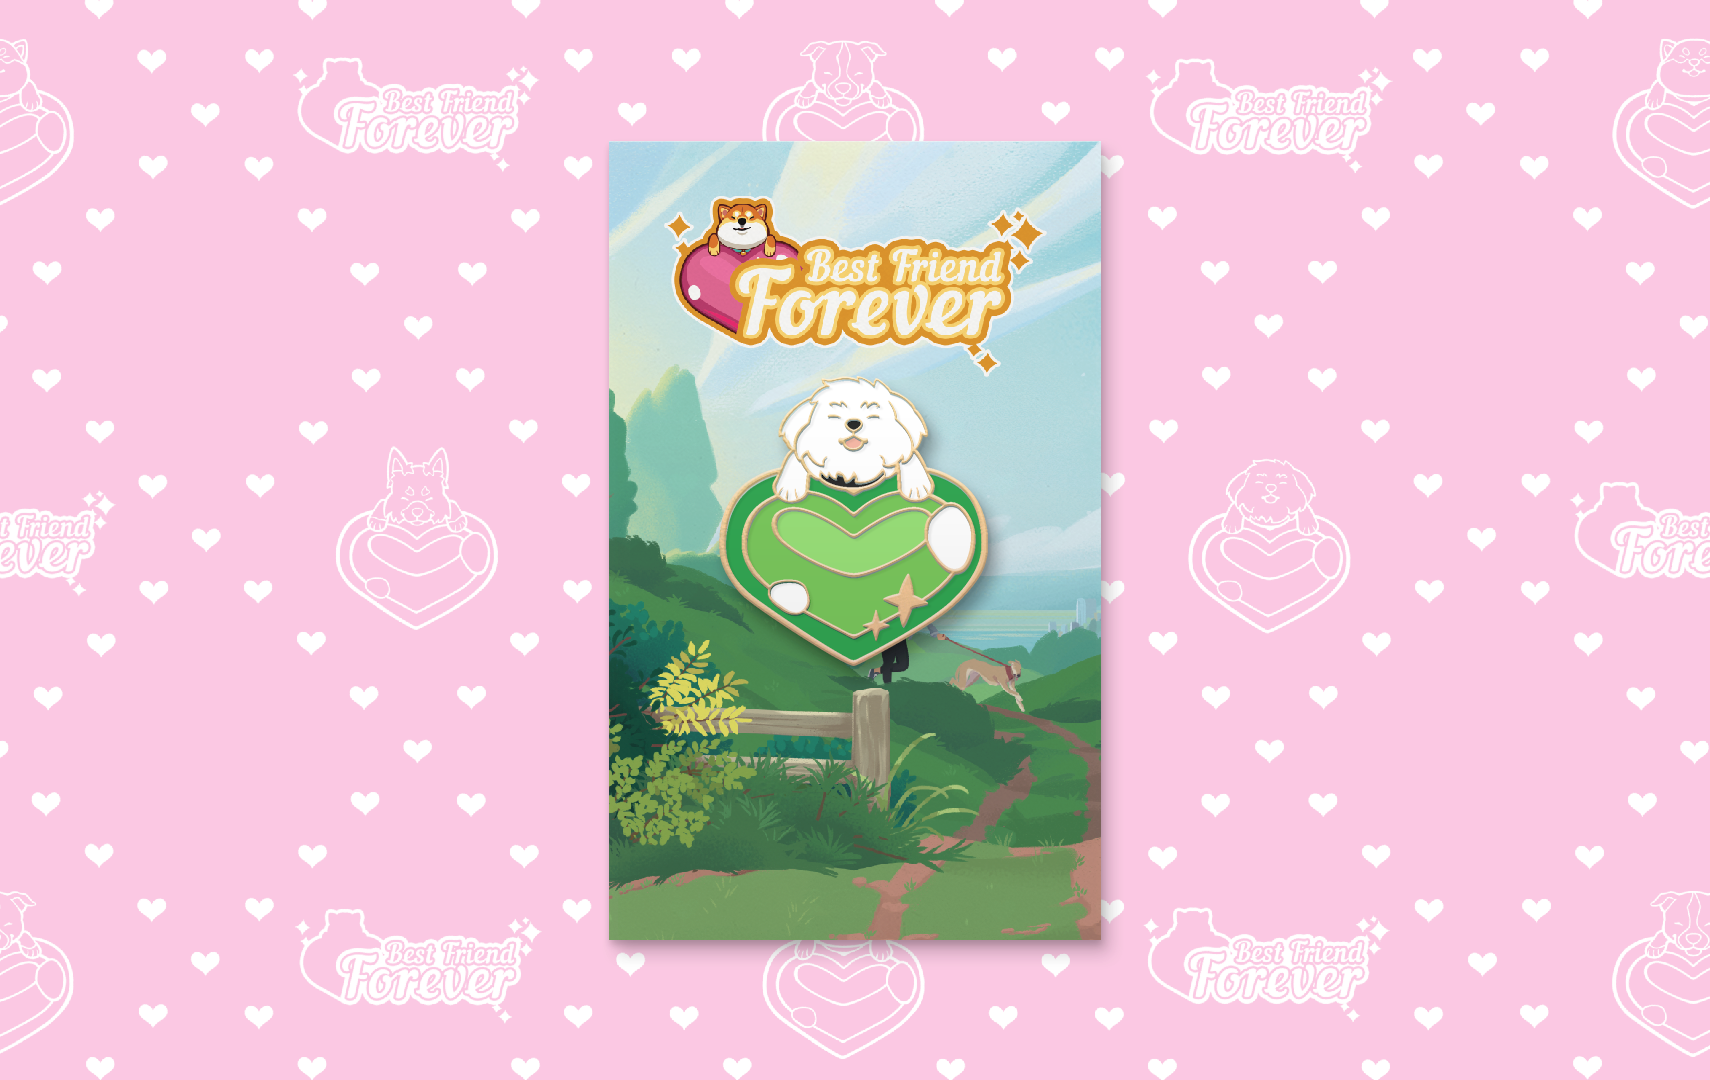 Green heart-shaped enamel pin with maltese peeking over it. Backing card has Best Friends Forever logo and country pathway beside a lake. On pink background with white hearts pattern.